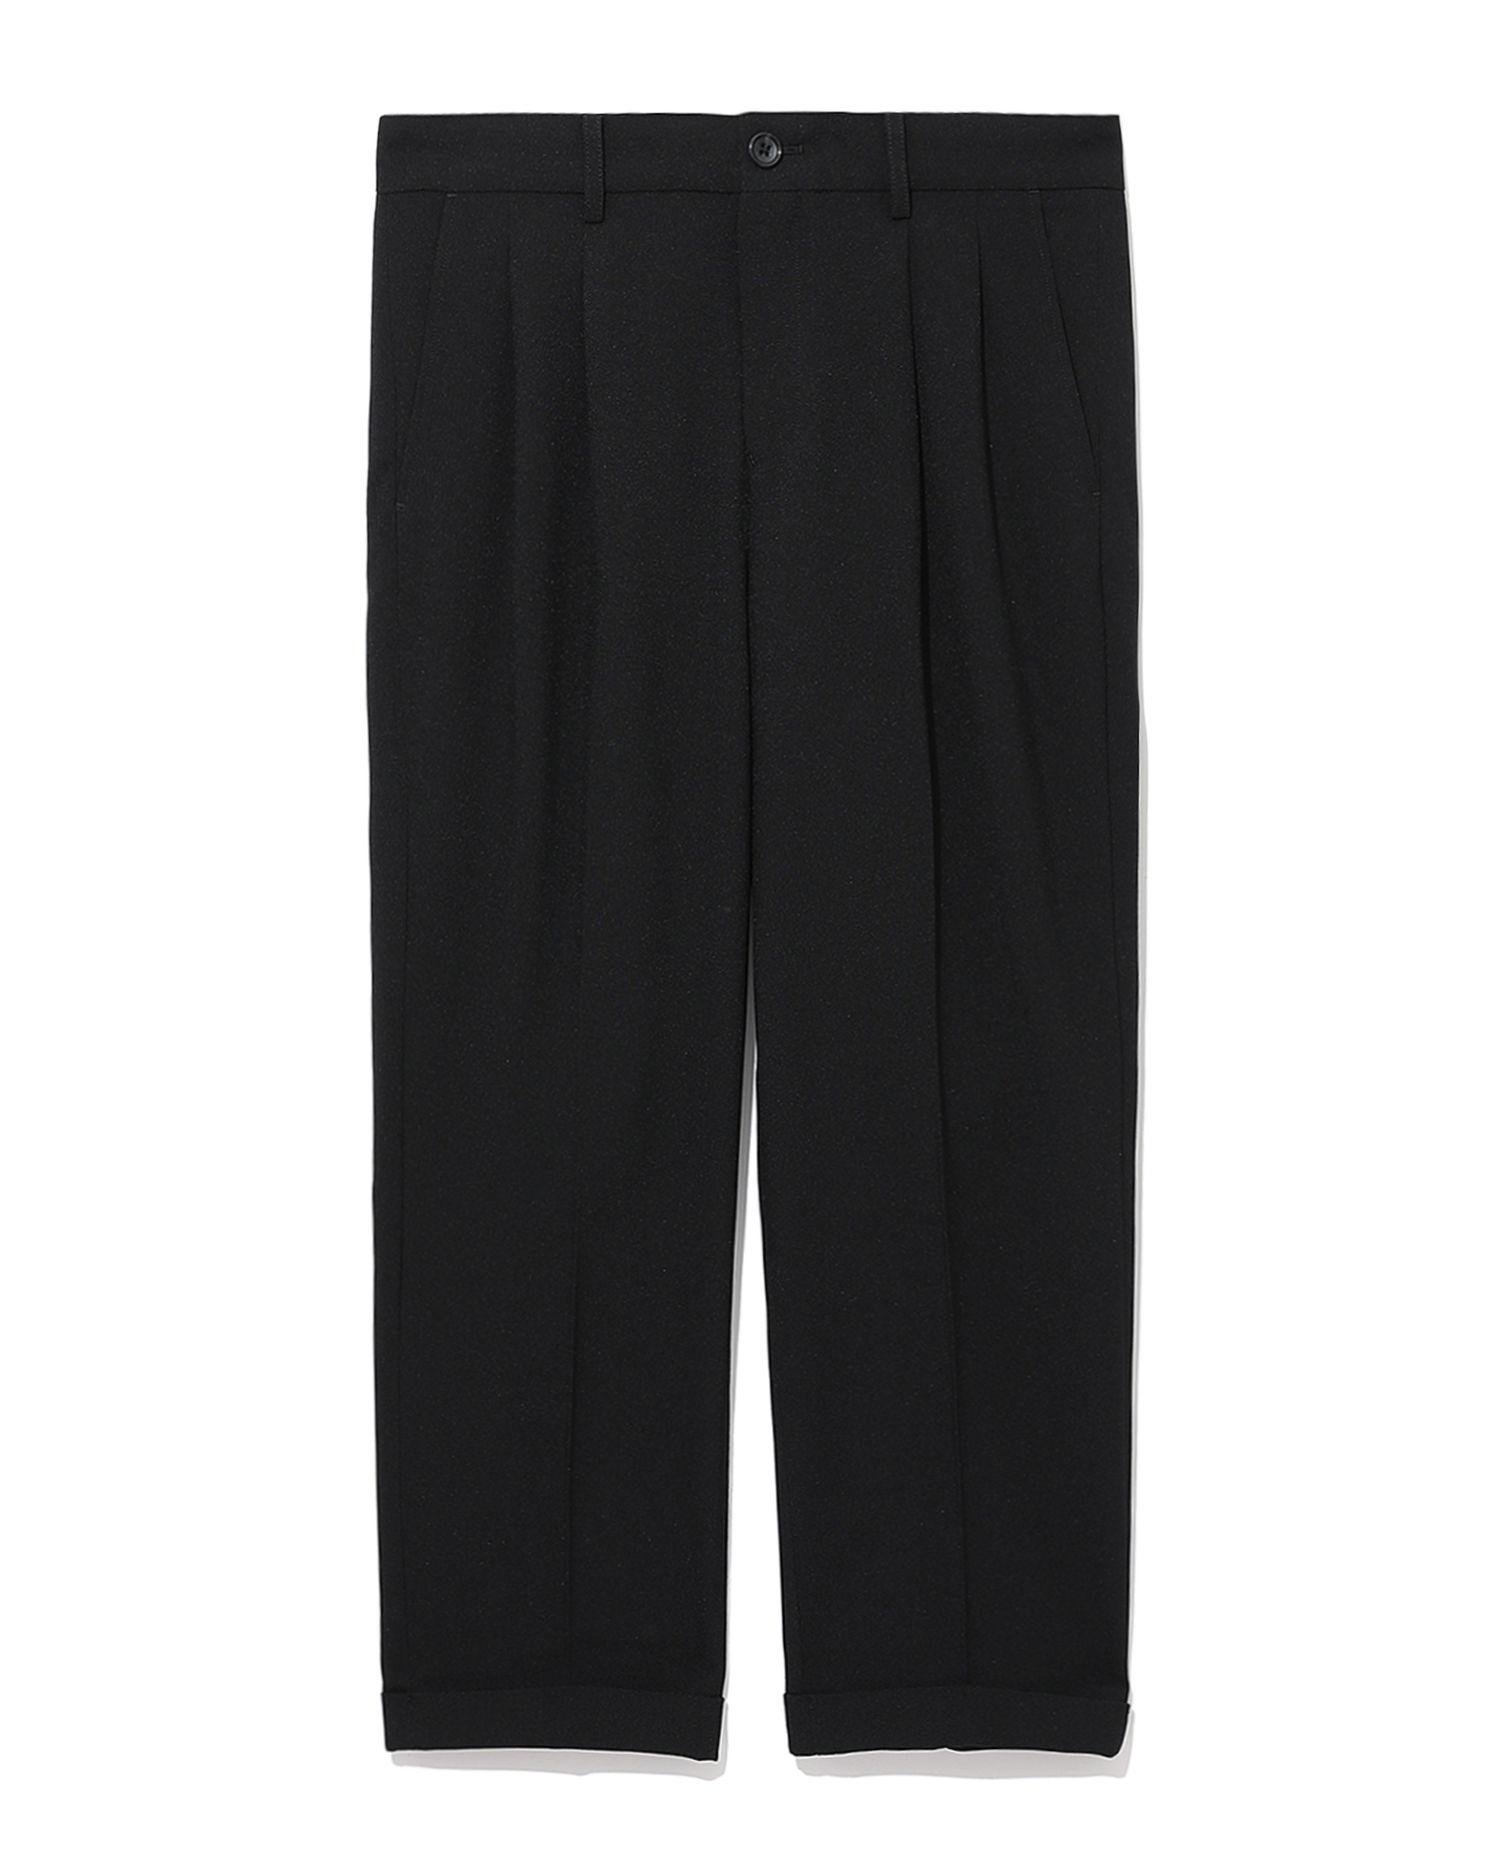 Front pleat pants by BEAMS